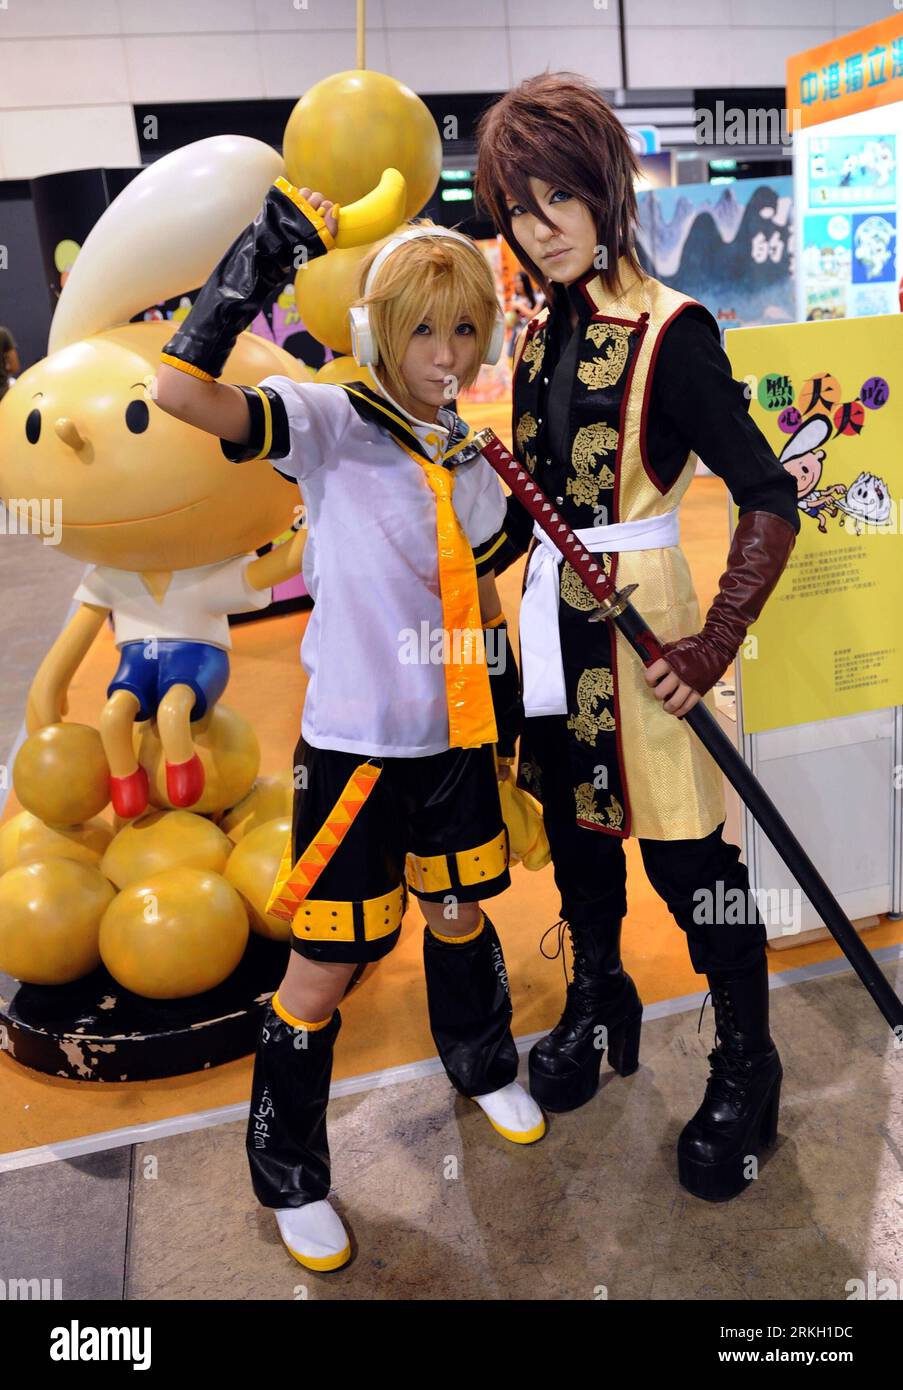 Bildnummer: 55675146  Datum: 02.08.2011  Copyright: imago/Xinhua (110802) -- HONG KONG, Aug. 2, 2011 (Xinhua) -- Anime fans dress themselves as their favourite animation characters at the Hong Kong Convention and Exhibition Centre in south China s Hong Kong, Aug. 2, 2011. The 13th Ani-Com & Games Hong Kong closed here Tuesday. Nearly 700,000 fans and industry insiders from across the globe visited the five-day animation festival. (Xinhua/Chen Xiaowei) (hy) (ljh) CHINA-HONG KONG-ANIMATION FESTIVAL (CN) PUBLICATIONxNOTxINxCHN Gesellschaft Messe Spielemesse Cartoonmesse Computerspiel Hongkong xtm Stock Photo